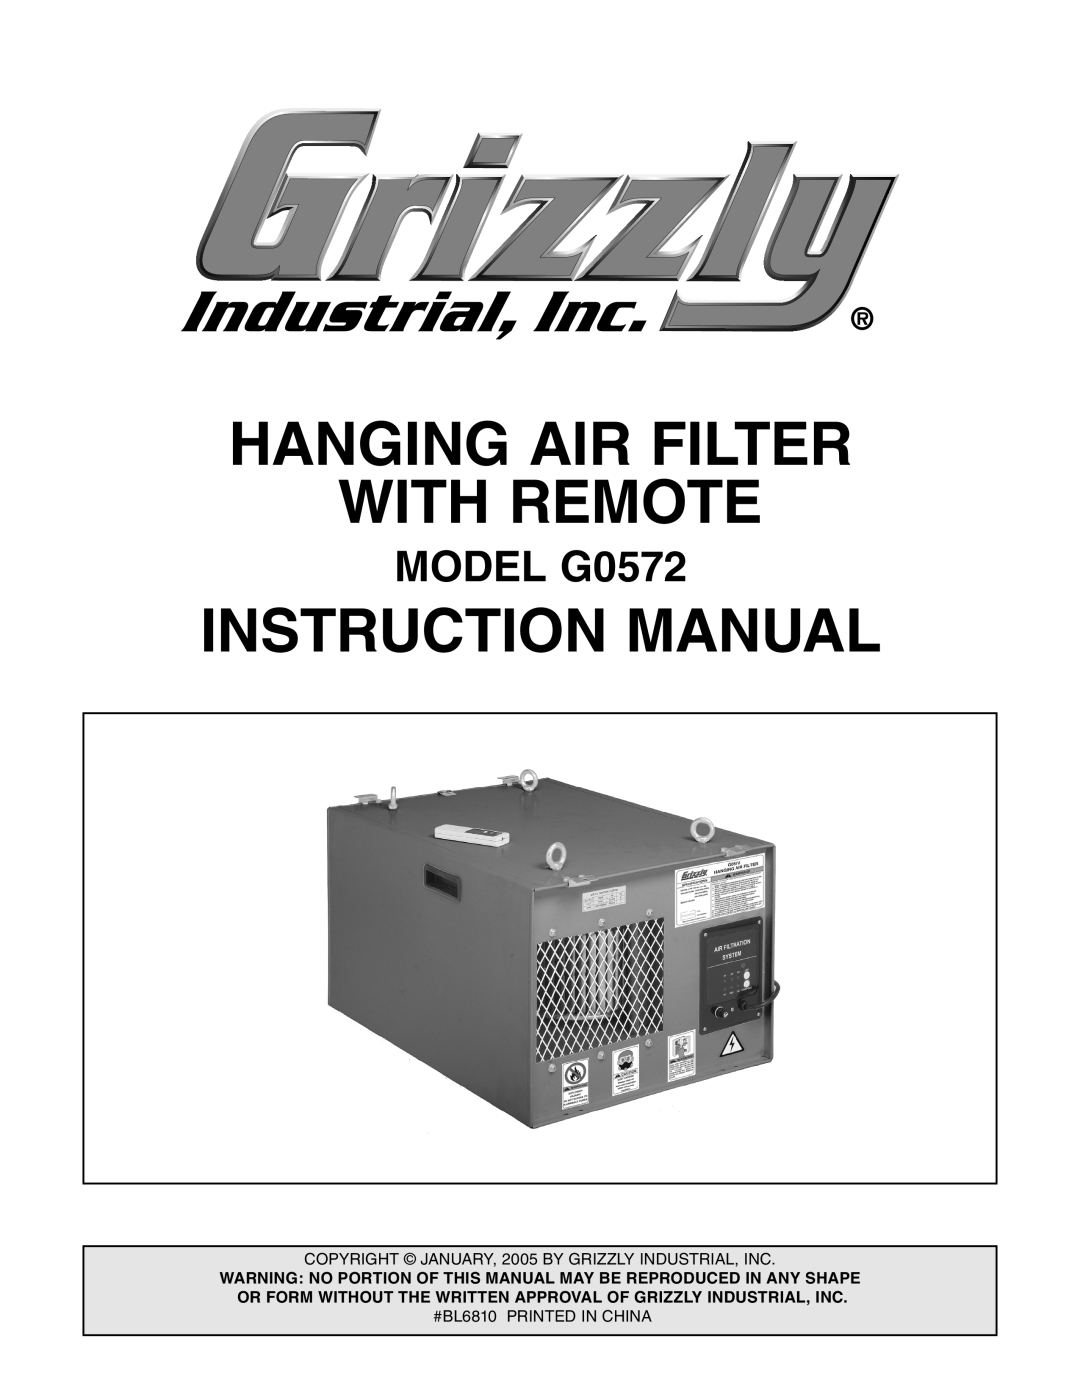 Grizzly instruction manual MODEL G0572, Hanging Air Filter With Remote, Instruction Manual 